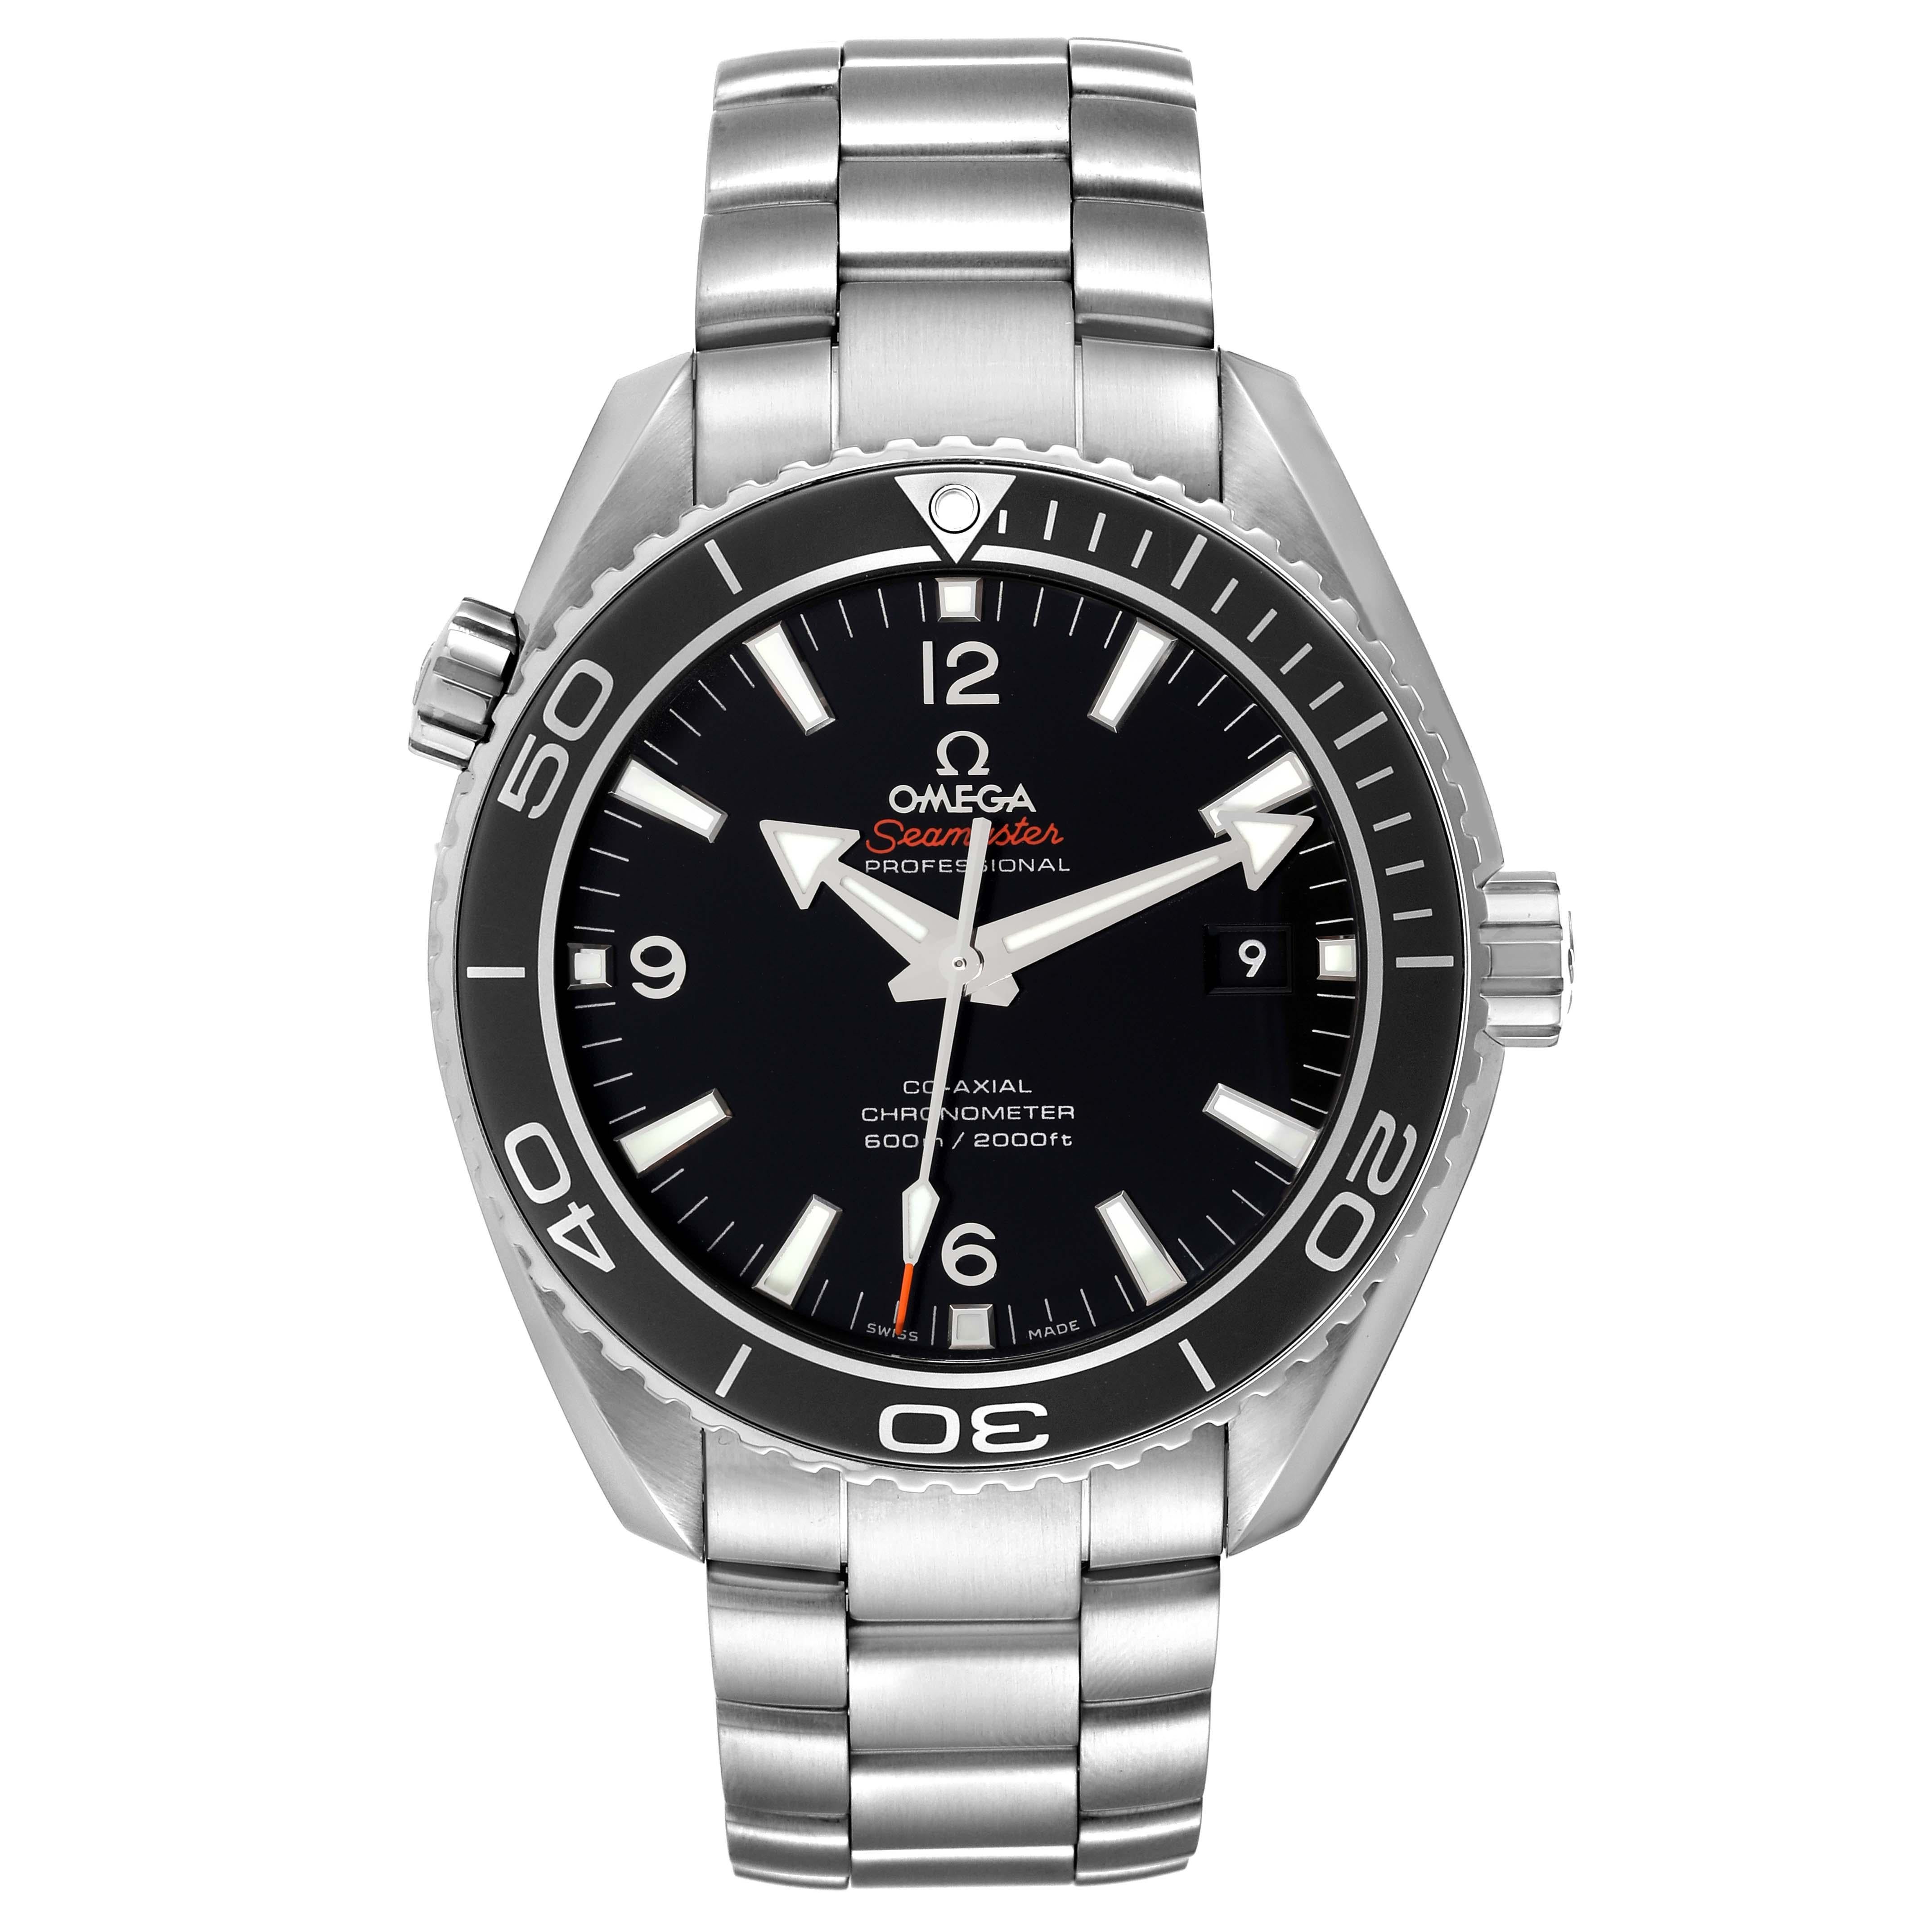 Omega Seamaster Planet Ocean 600M Steel Mens Watch 232.30.46.21.01.001 Box Card. Automatic self-winding chronograph movement with column wheel mechanism and Co-Axial Escapement for greater precision, stability and durability of the movement. Silicon